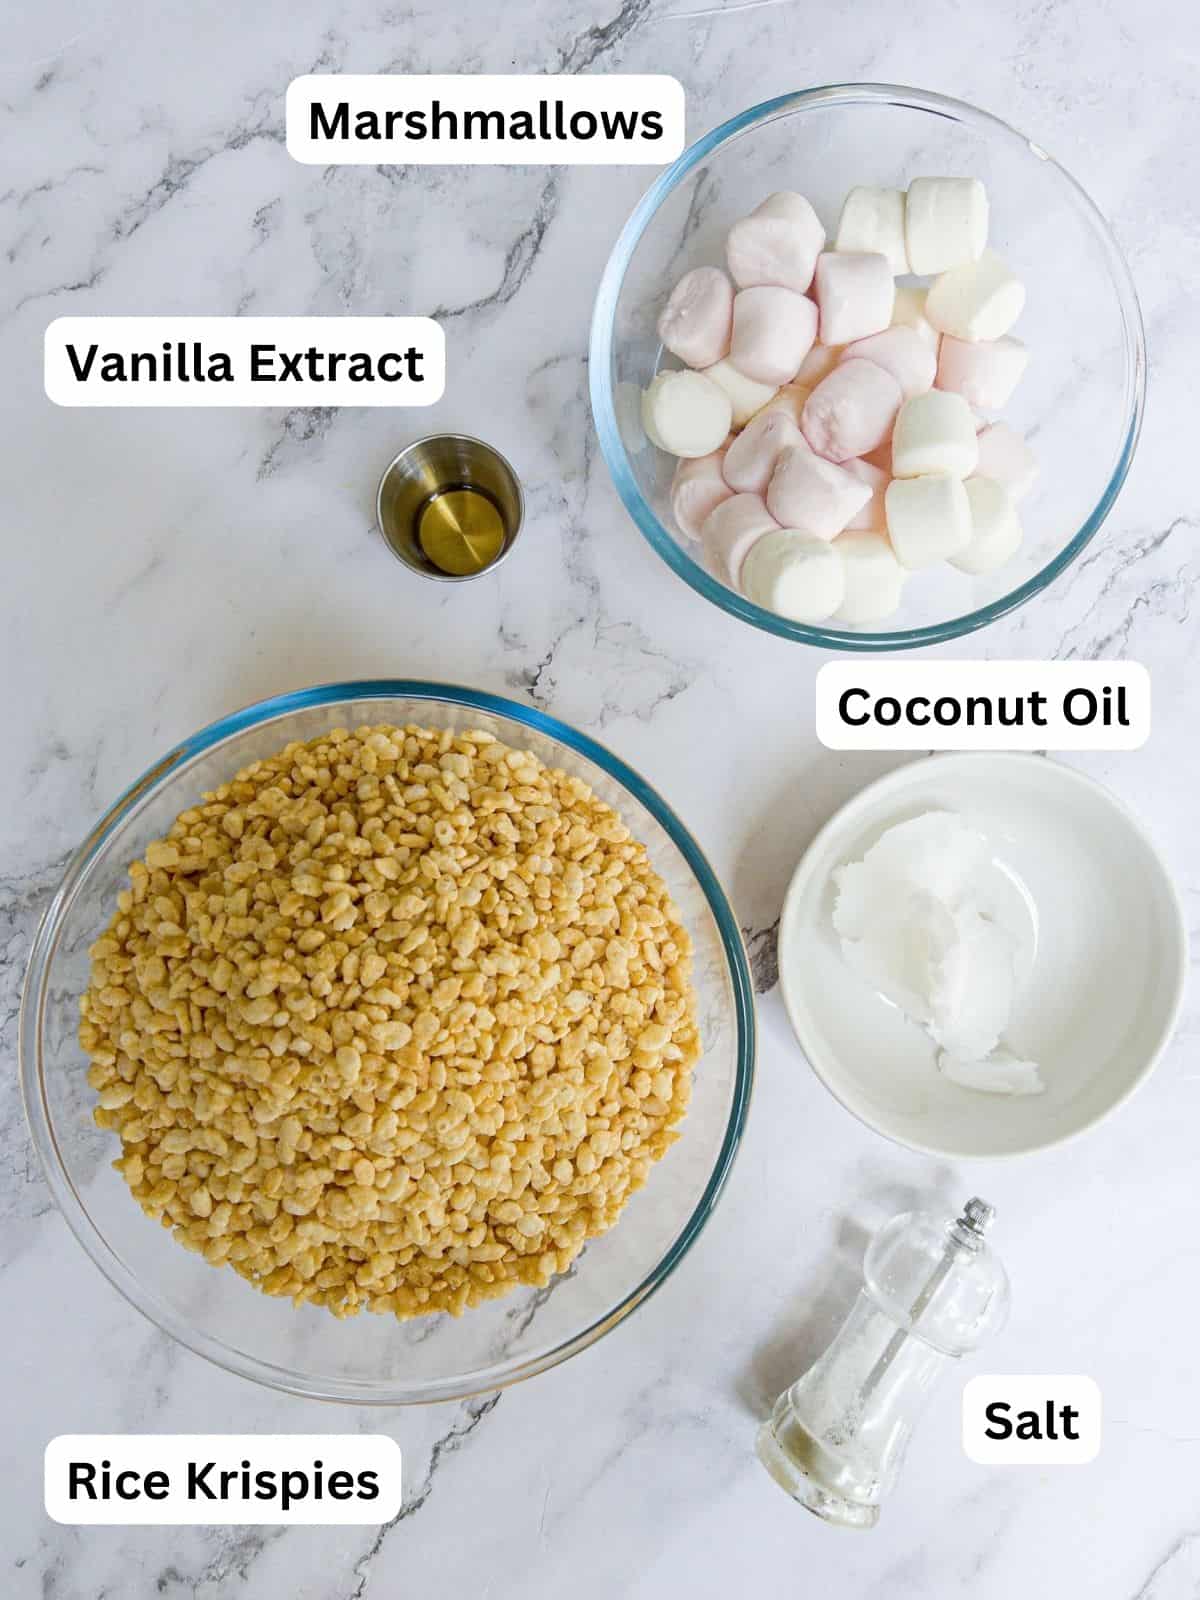 Ingredients laid out for dairy free rice krispie treats.